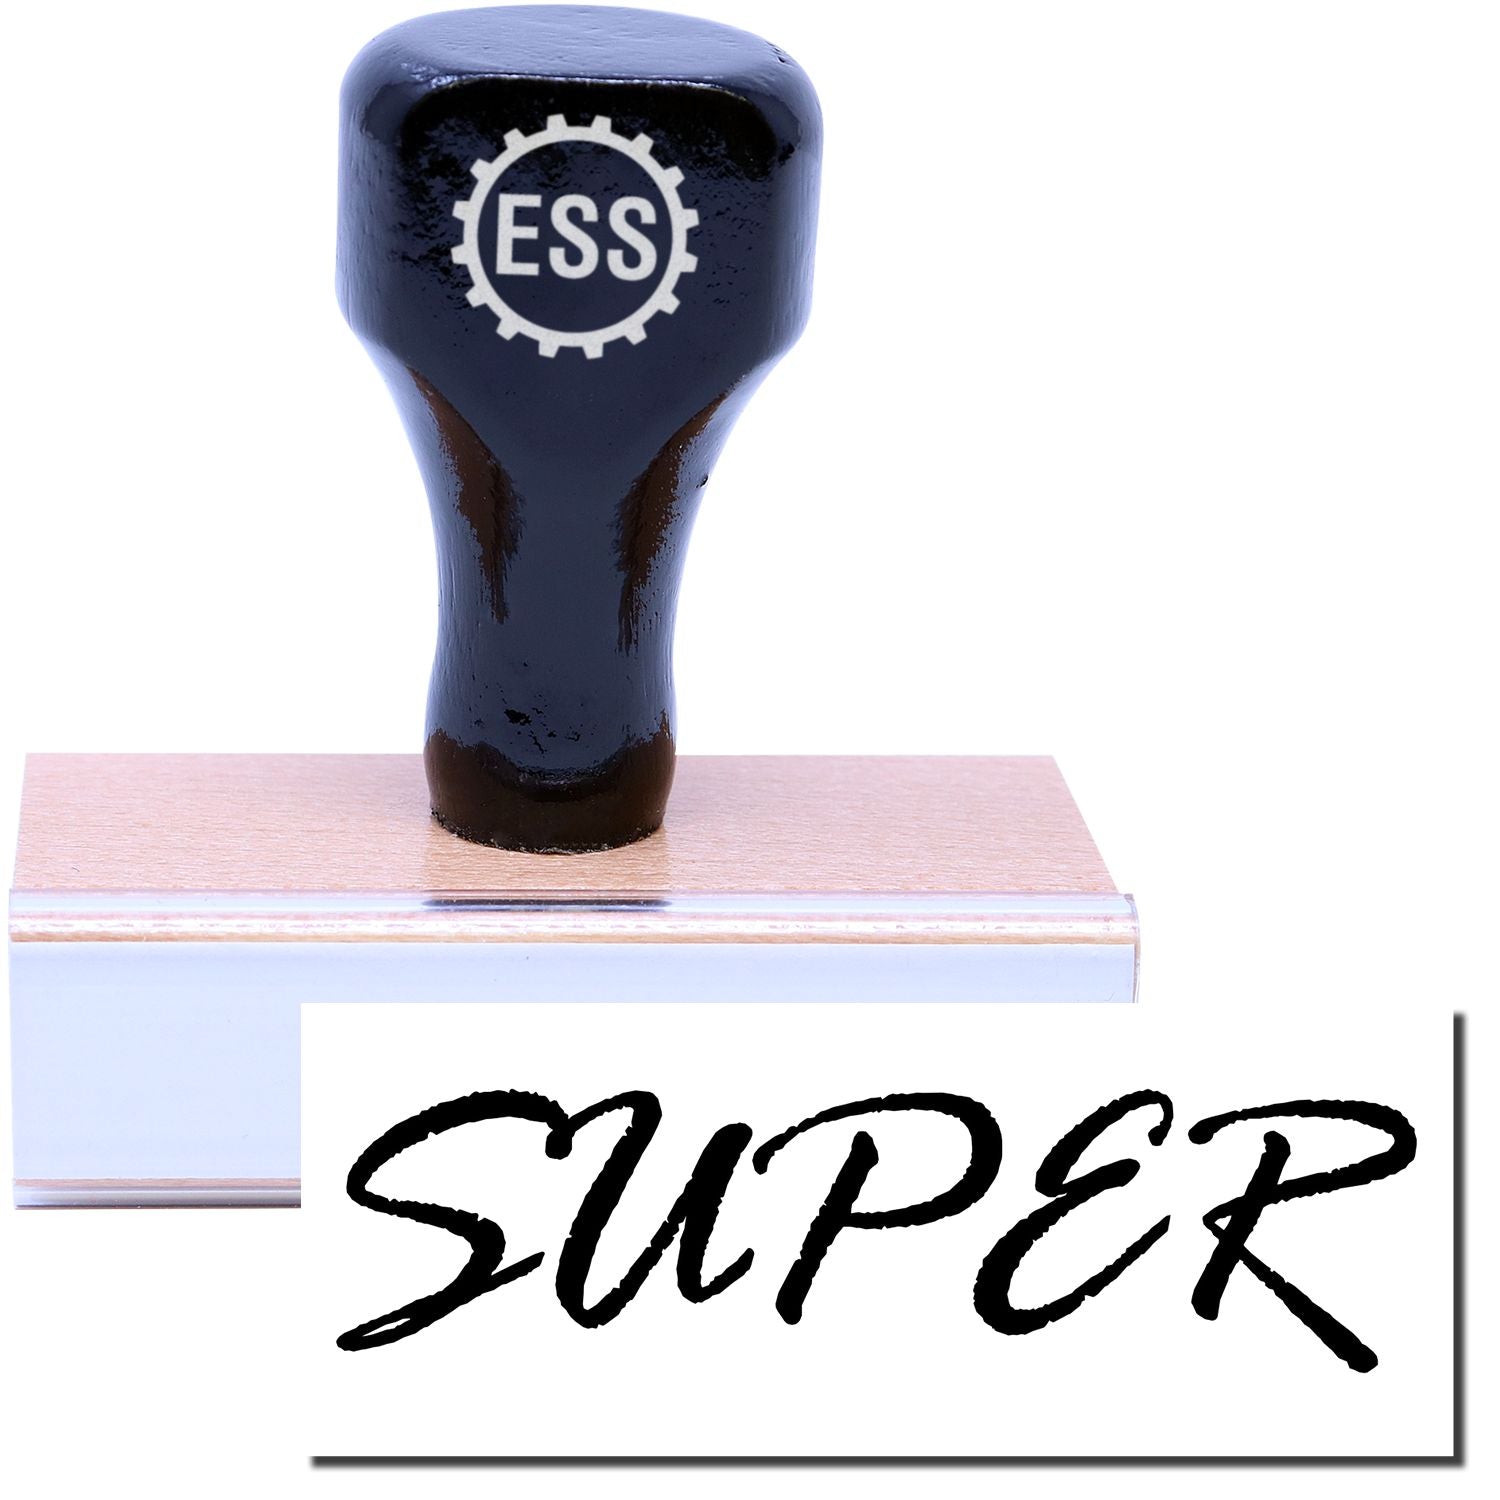 A stock office rubber stamp with a stamped image showing how the text "SUPER" in a large font is displayed after stamping.